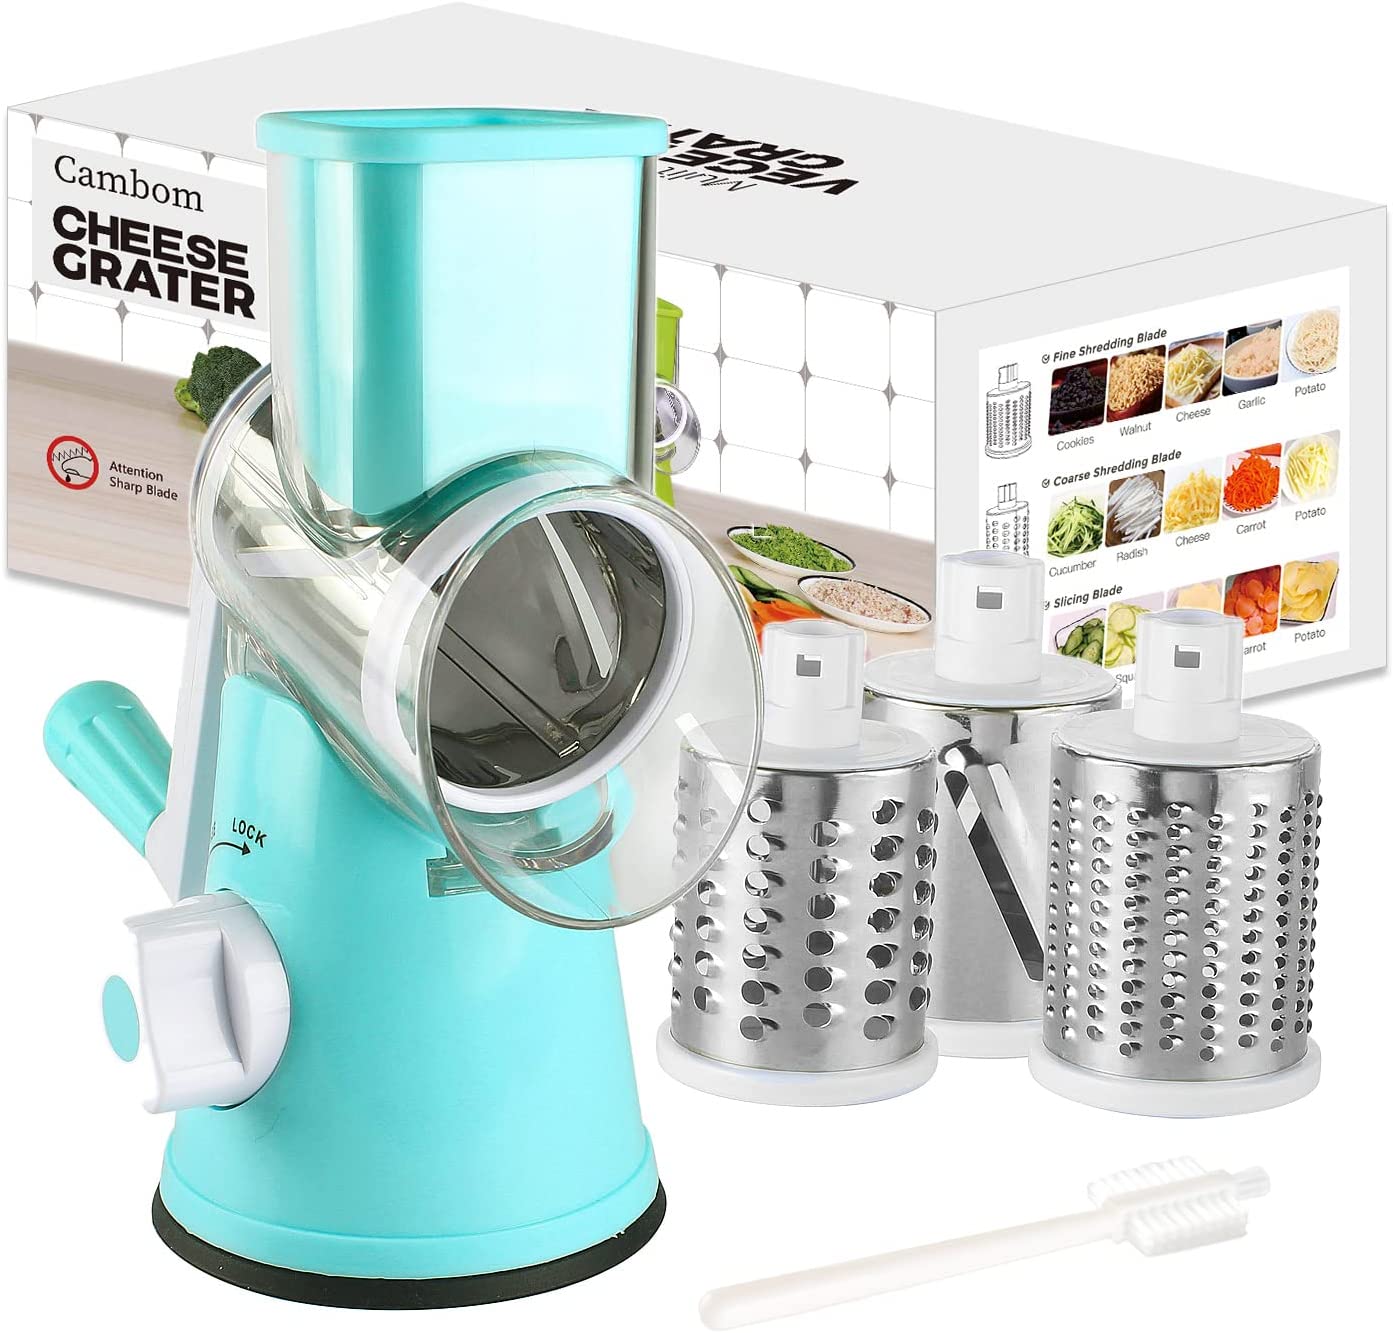 Geedel Rotary Cheese Grater, Kitchen Grater Vegetable Slicer with